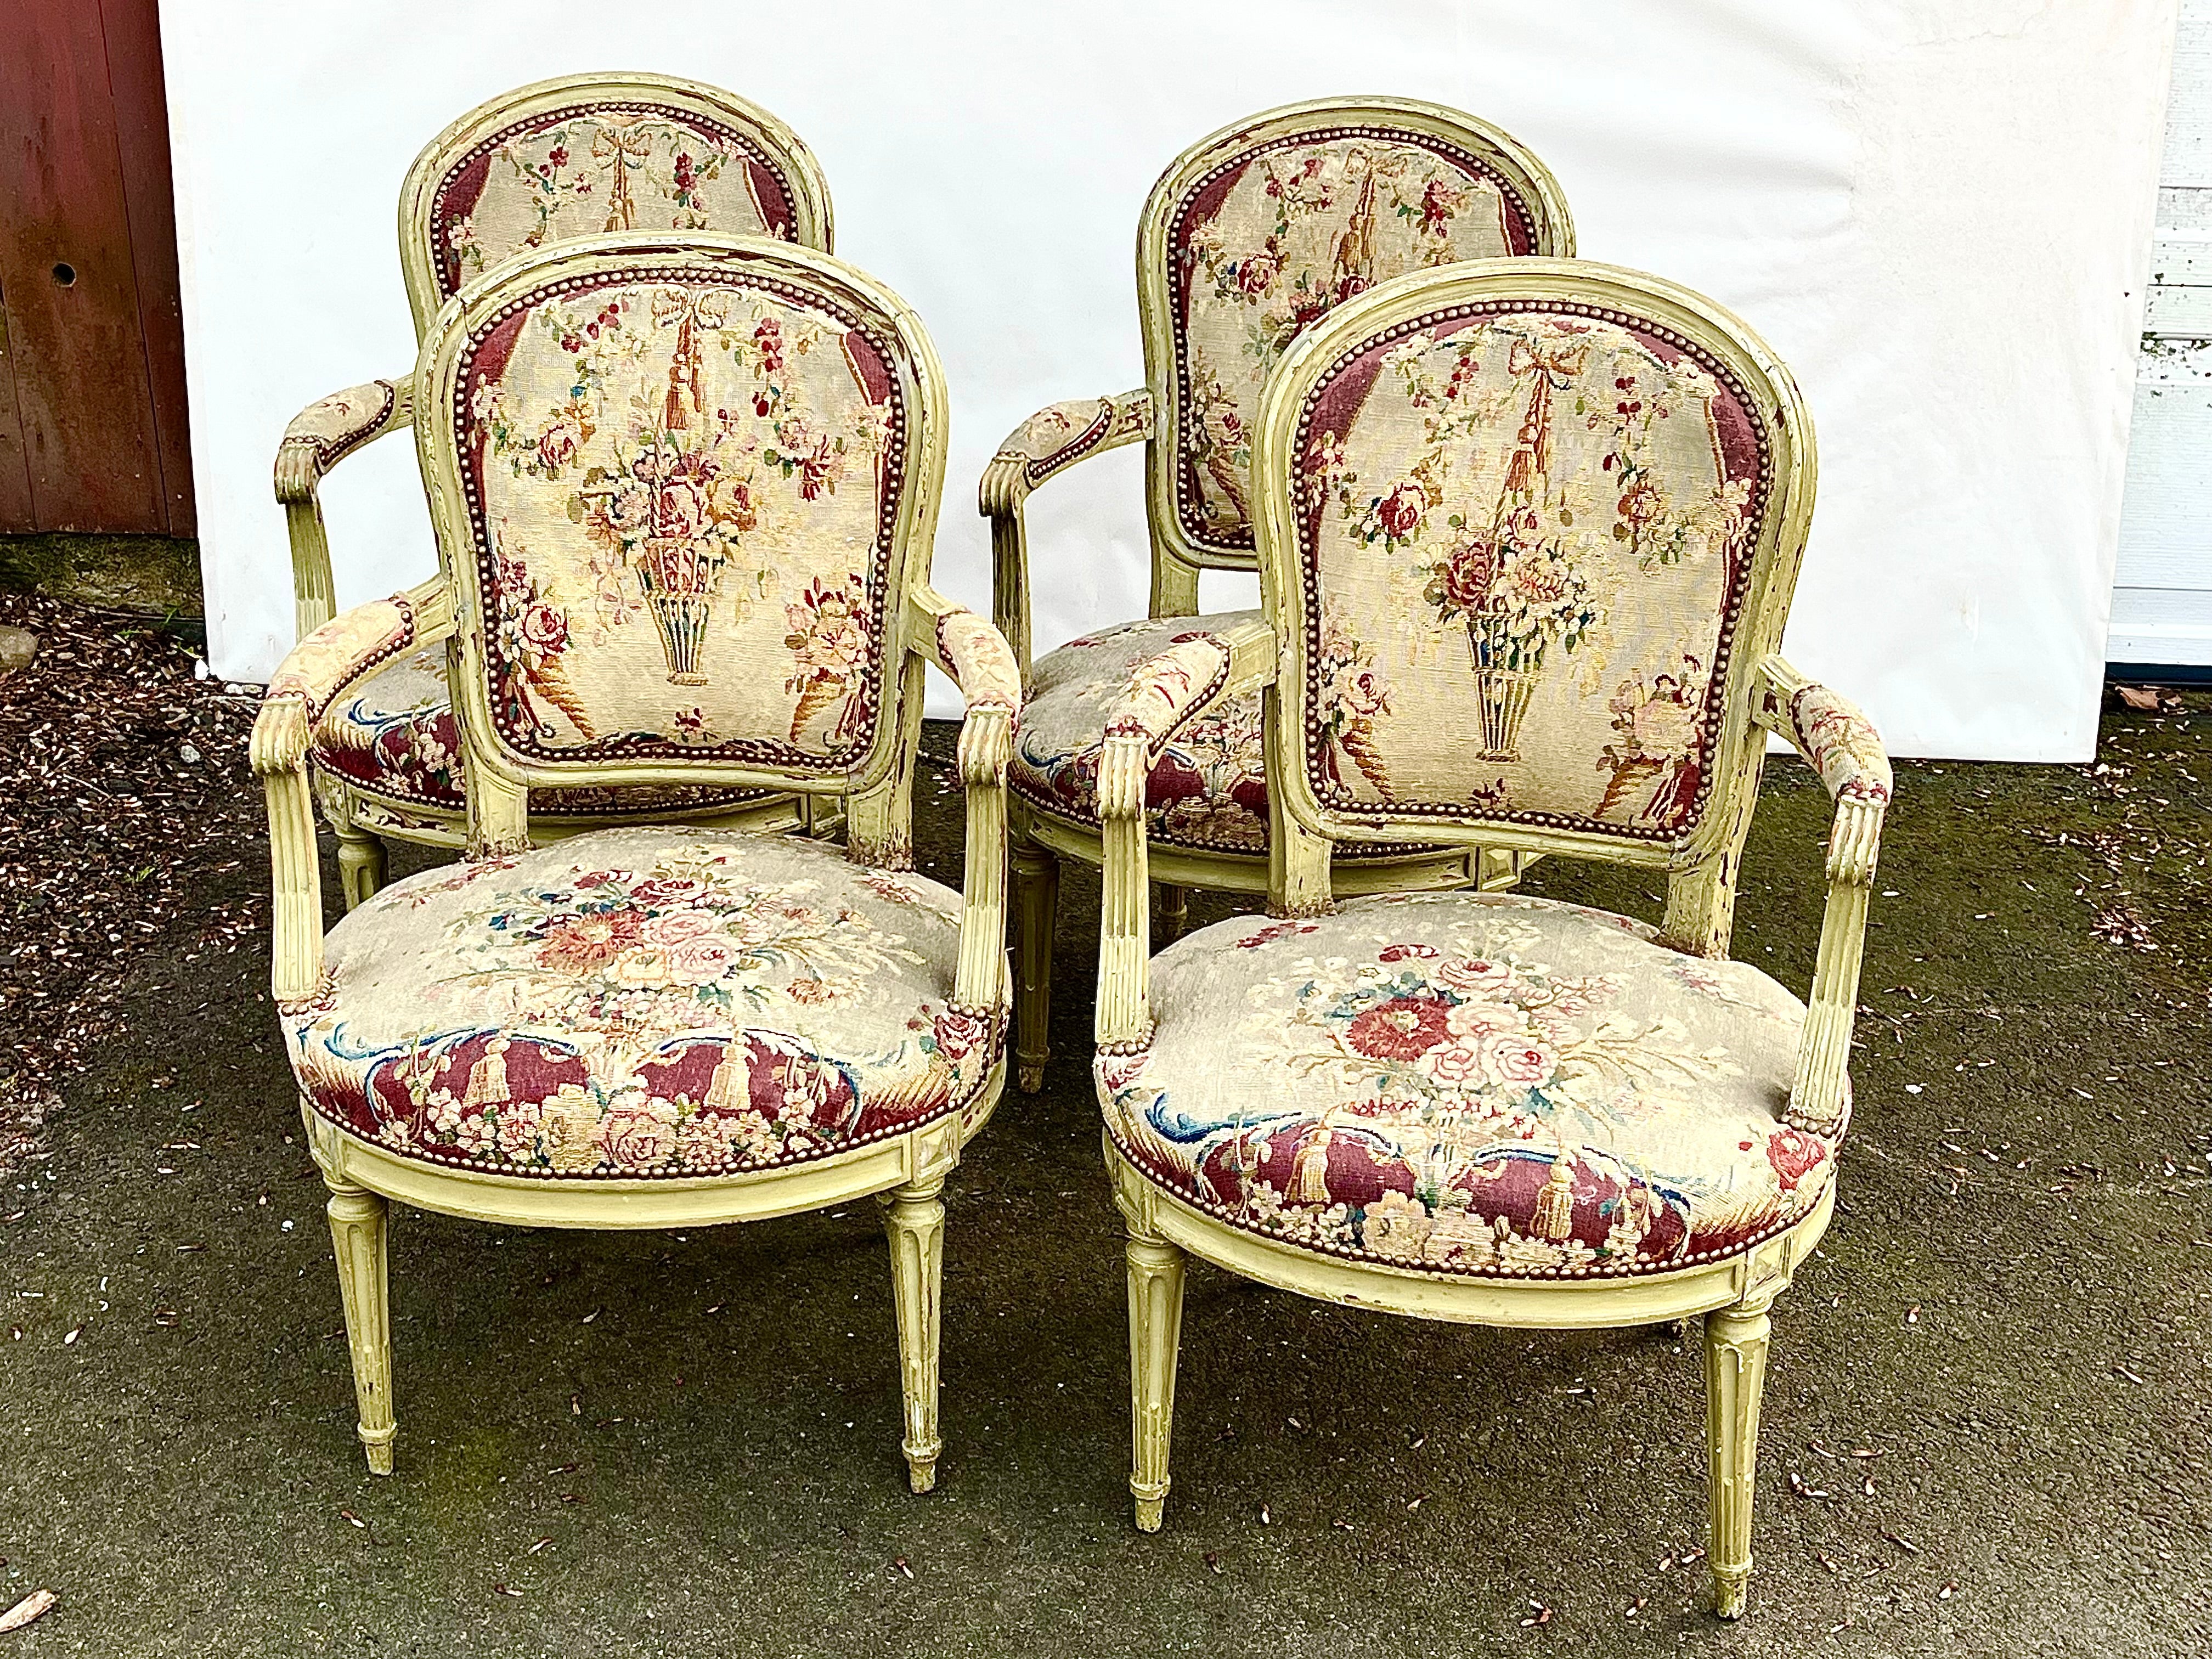 A set of 4 Louis XVI period fauteuils in original green painted finish, with 18th century needlepoint tapestry seats and backs, each chair signed by the maker on the seat stretcher “F. LAPIERRE A LYON”.

Can be purchased in pairs for half the money.